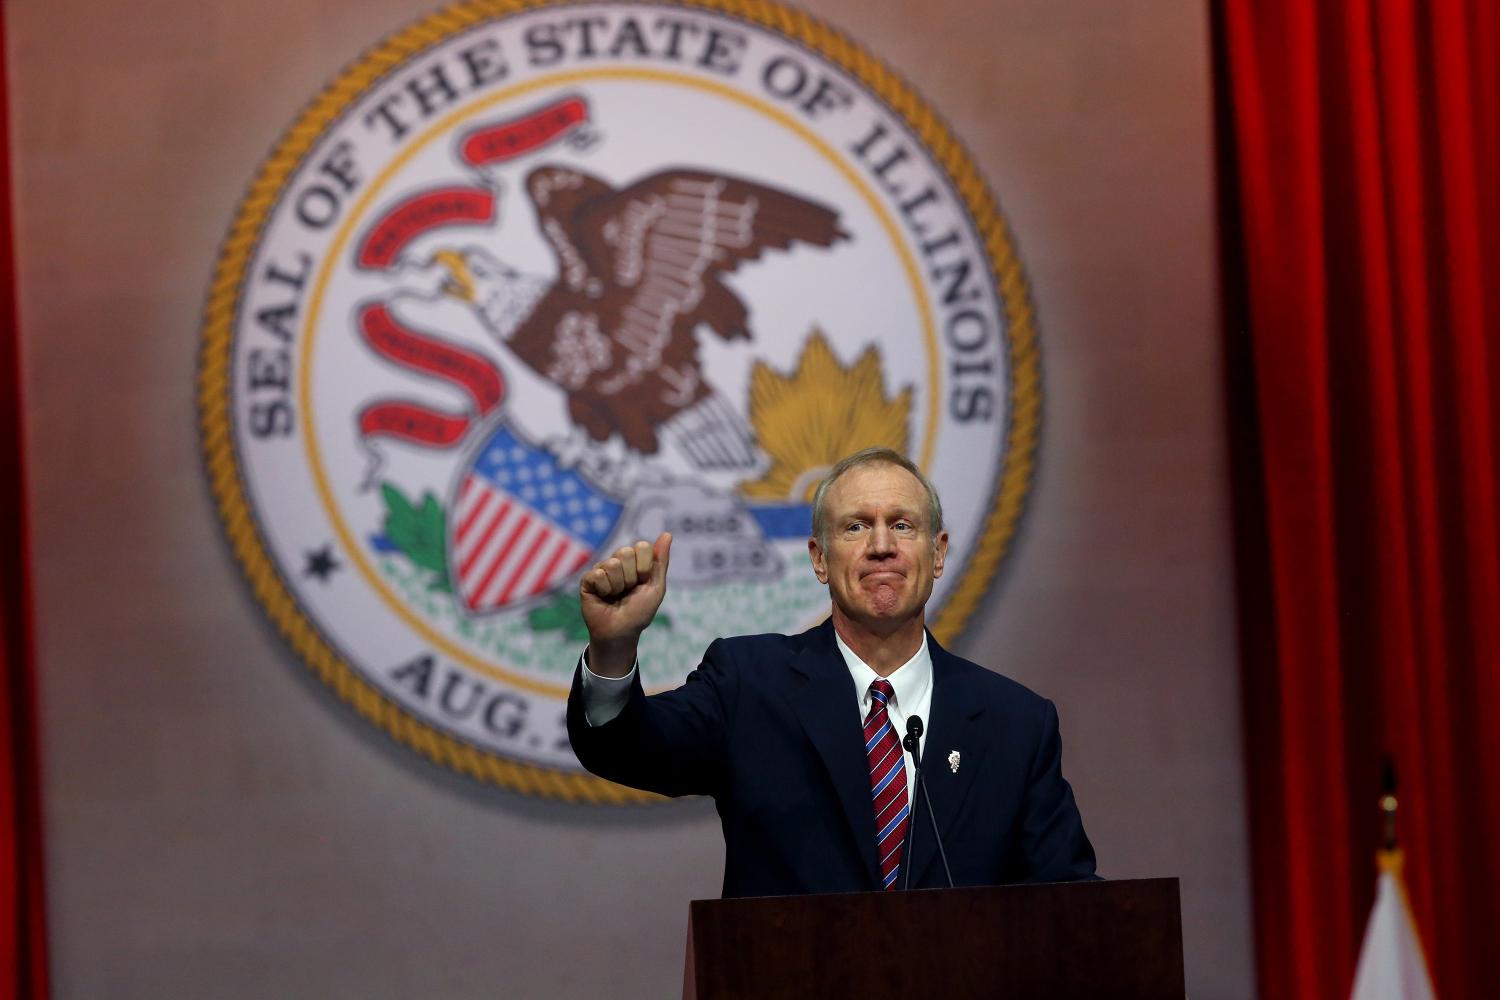 Gov. Bruce Rauner gives a thumbs up after giving his first speech as governor on Monday Jan. 12, 2015 at the Prairie Capital Convention Center in Springfield, Ill. Local democrats blasted Rauners speech regarding Illinois budget impasse this week.